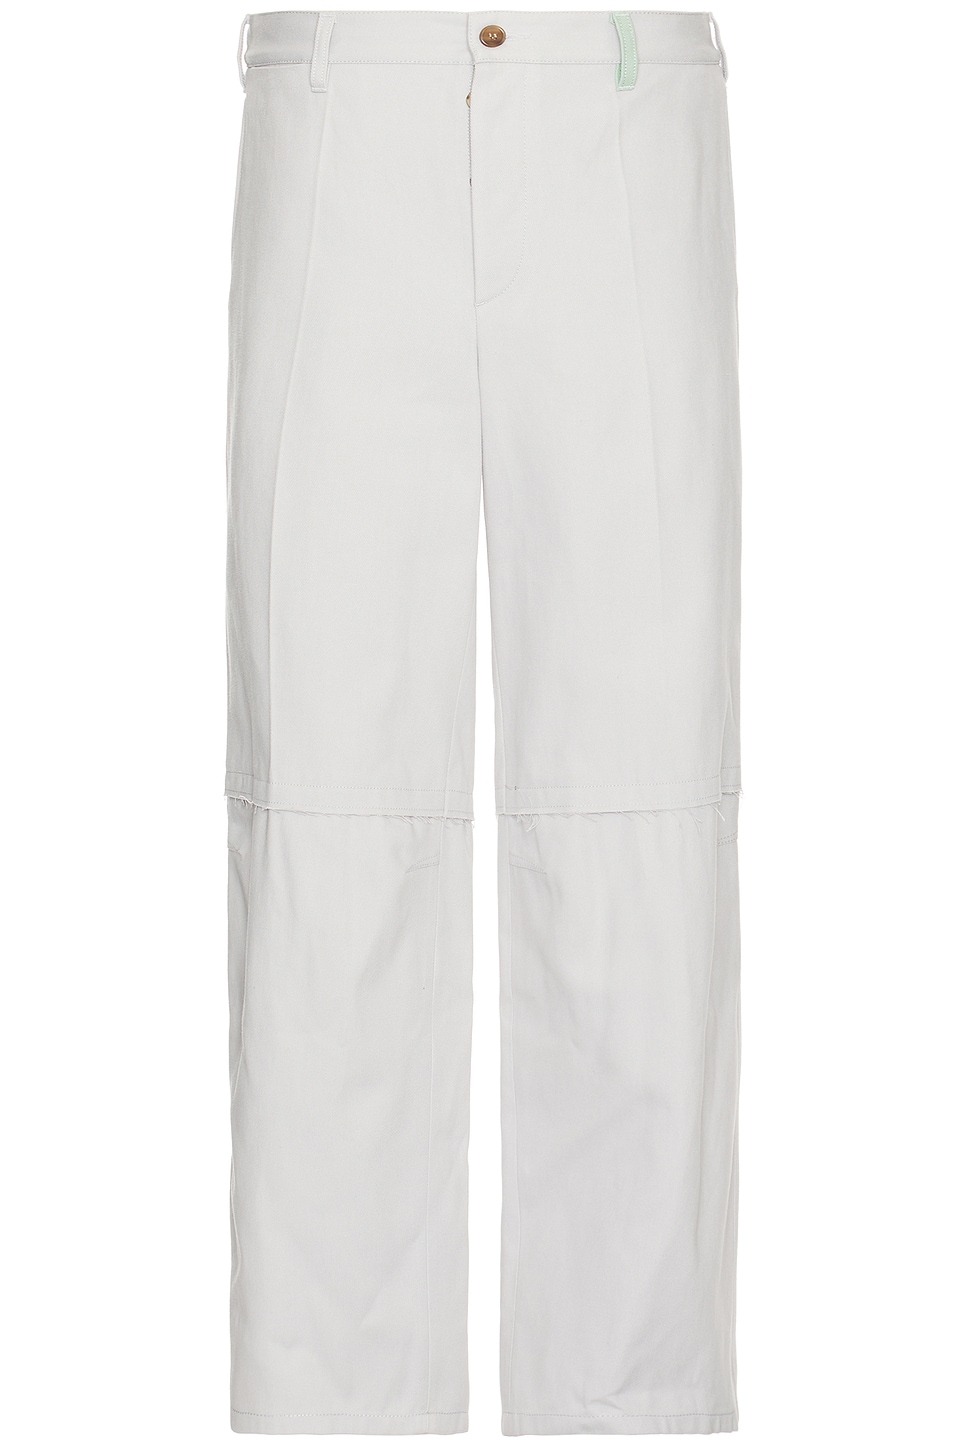 Image 1 of Marni Trousers in Sodium